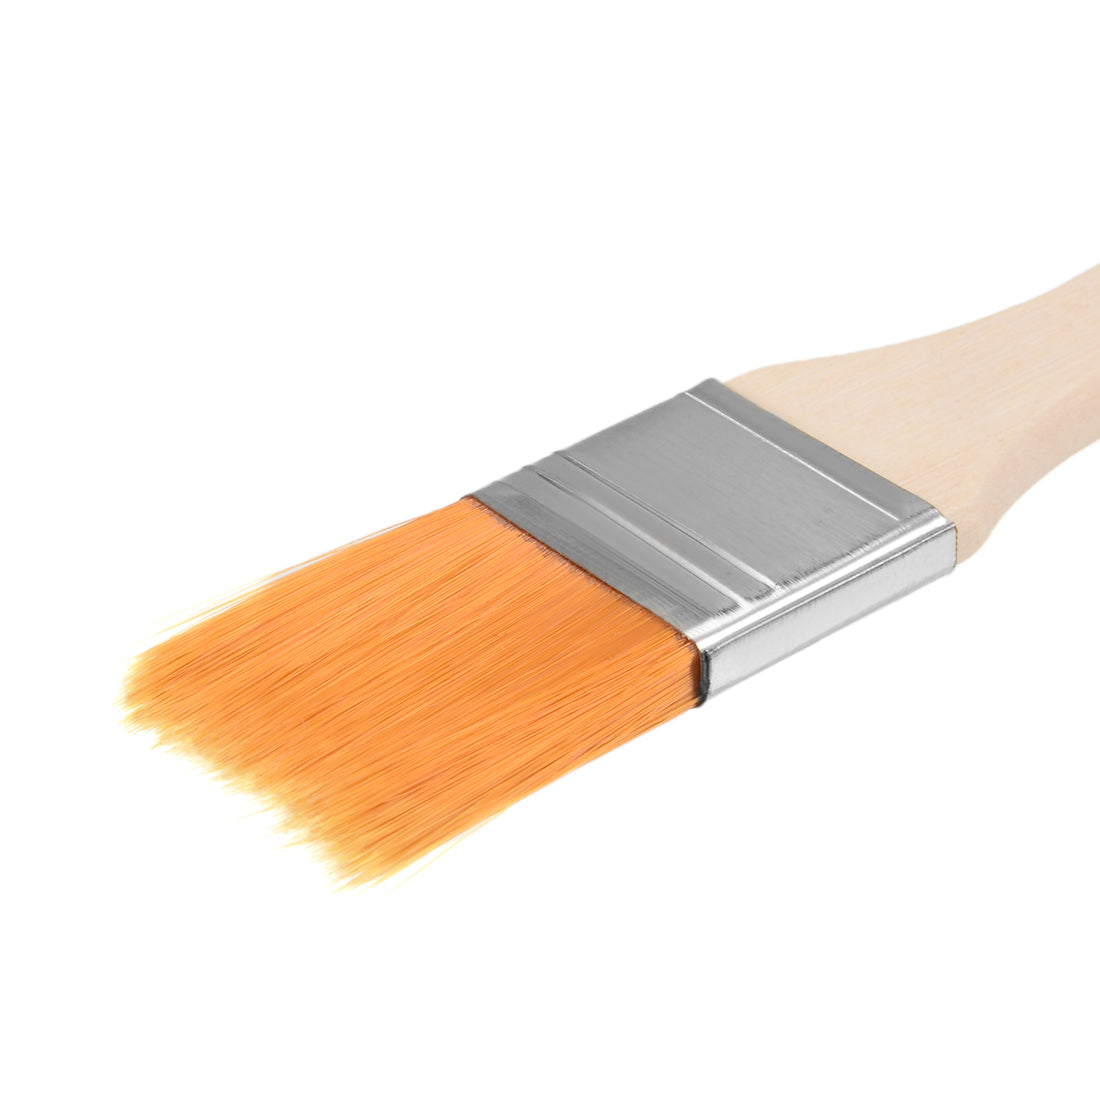 uxcell Uxcell 5.5 inch Length Wooden Handel Brushes for Paint, Stains, Varnishes, Glues